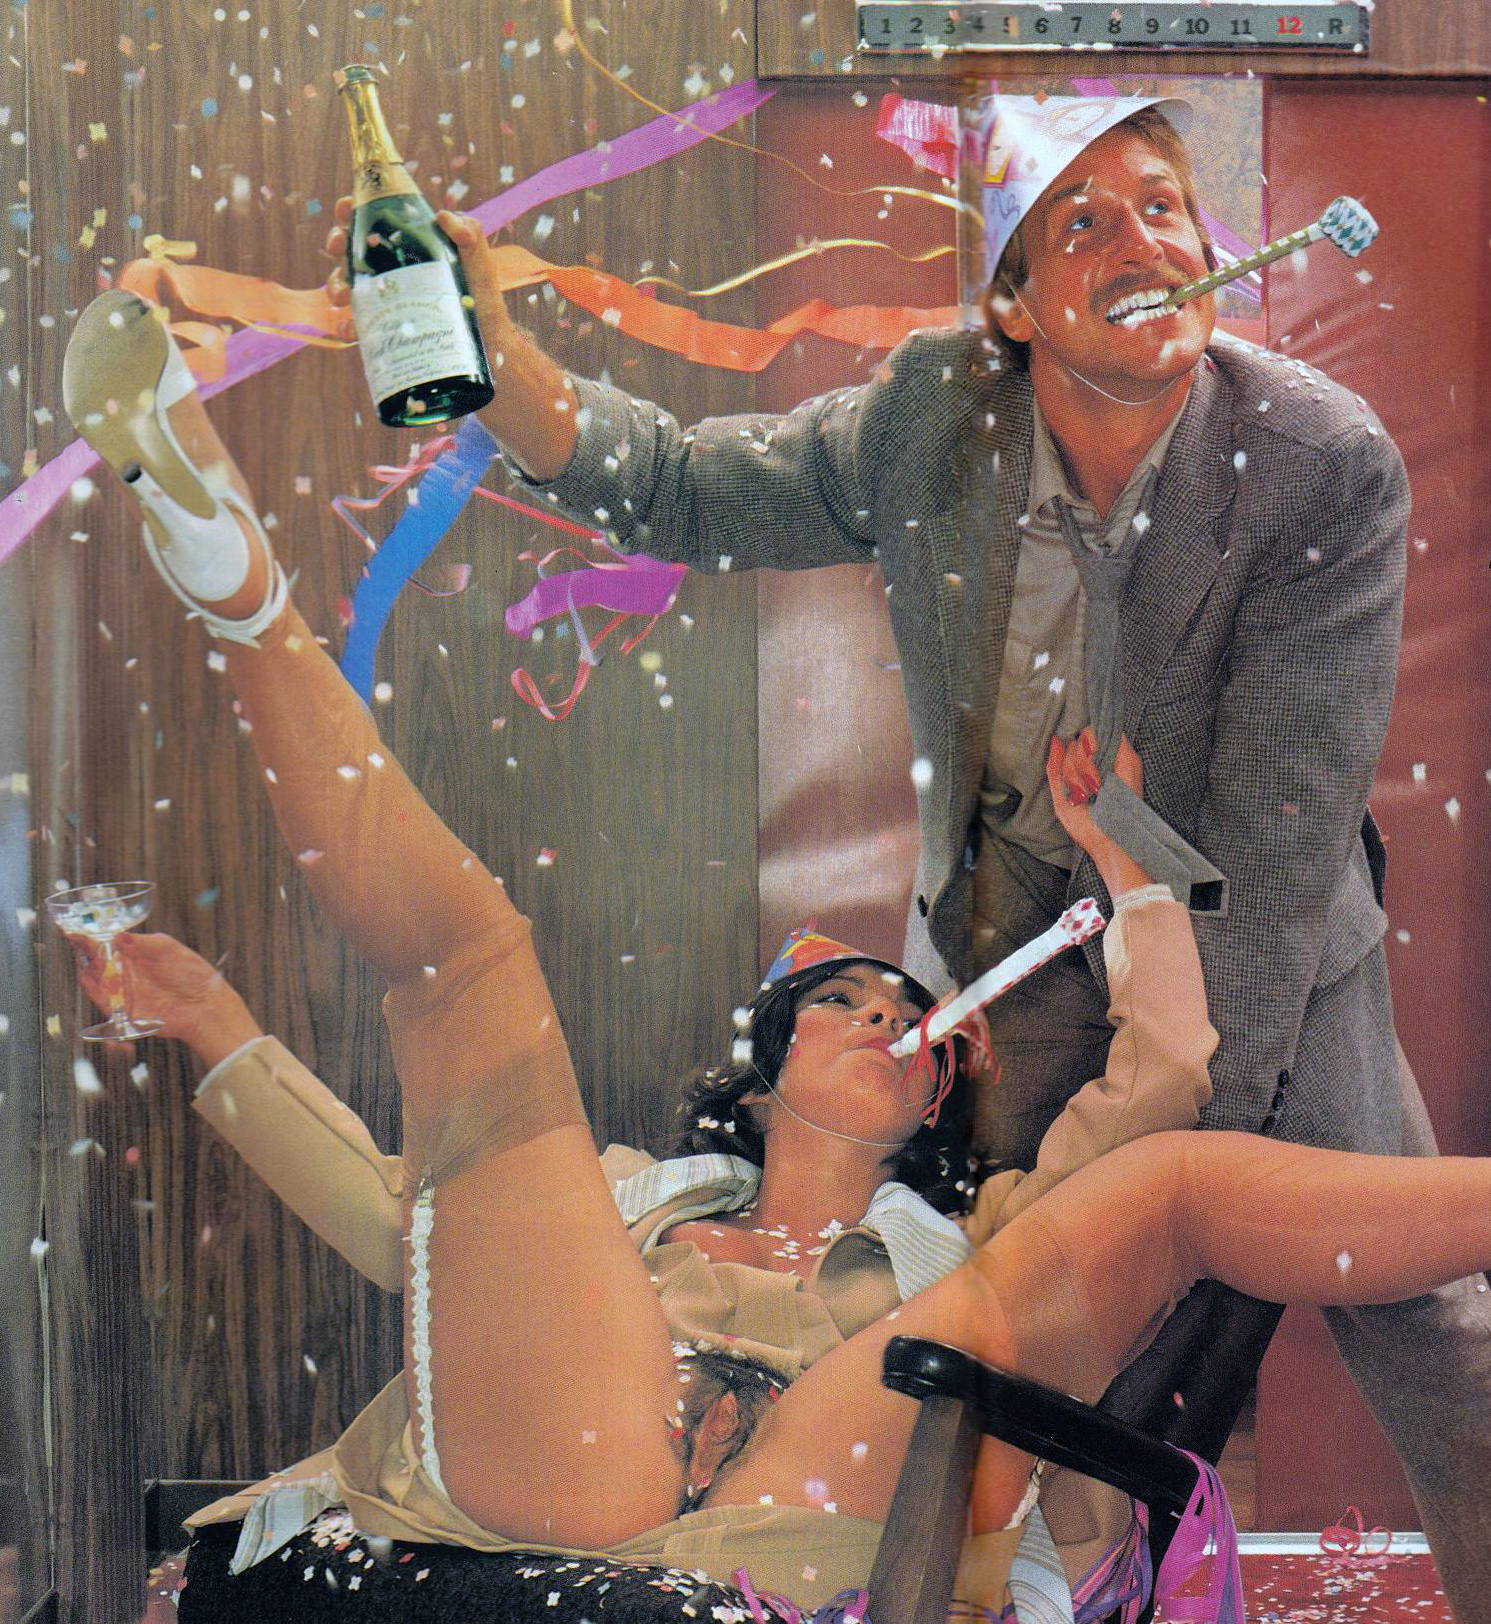 New Years Party Porn - New Year's Eve Office Party Orgy / Hustler Magazine / 1982 â€” Retroâ€”Fucking